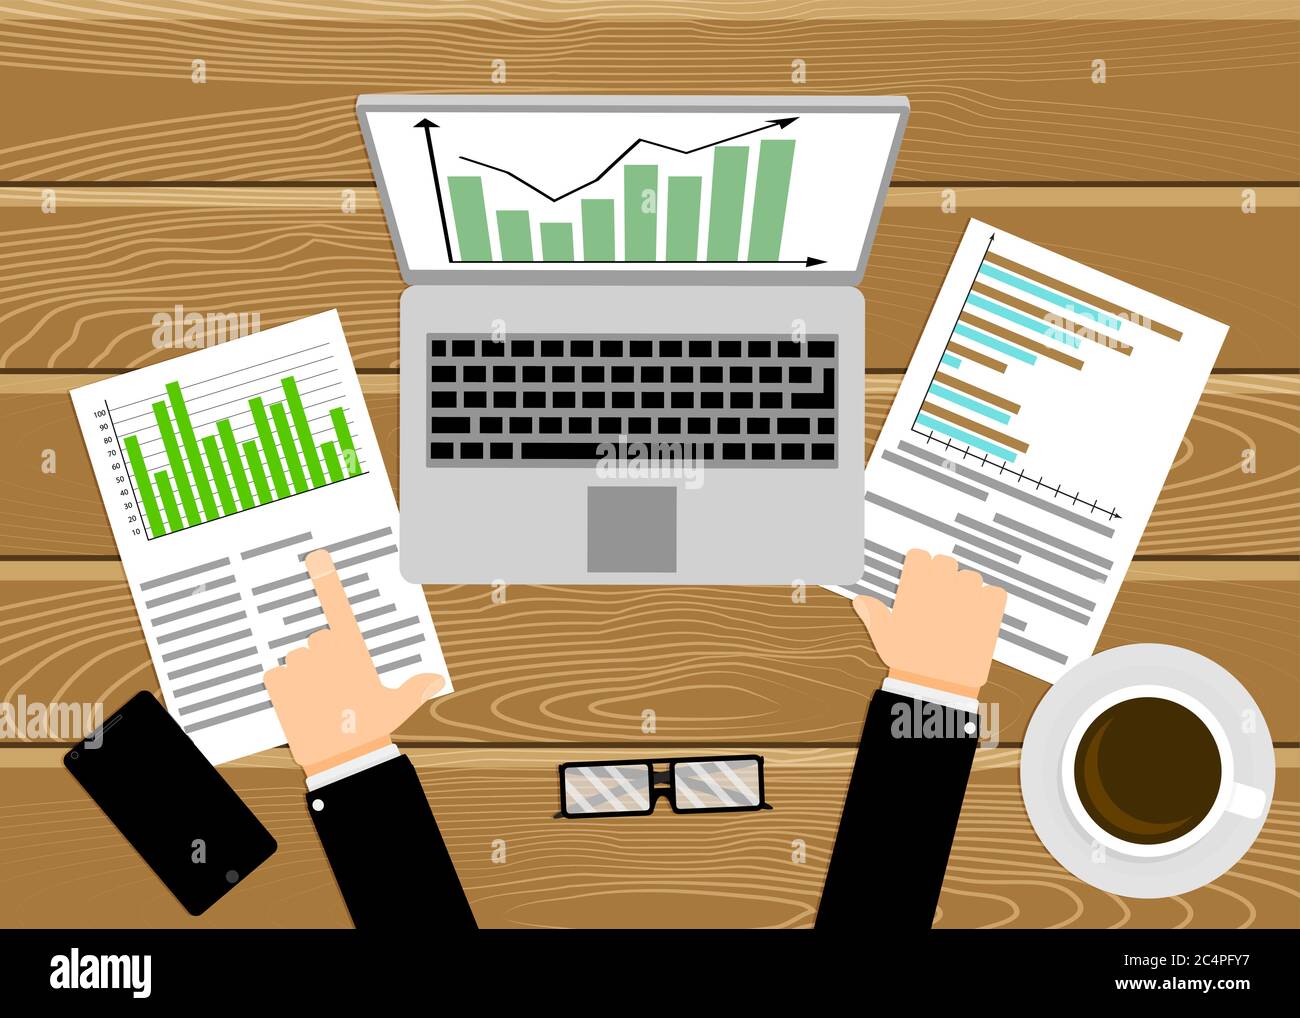 Businessman analyzing economic rate, workplace with laptop. Chart growth, graph analyze market, research at computer, strategy profit, monitoring on d Stock Vector